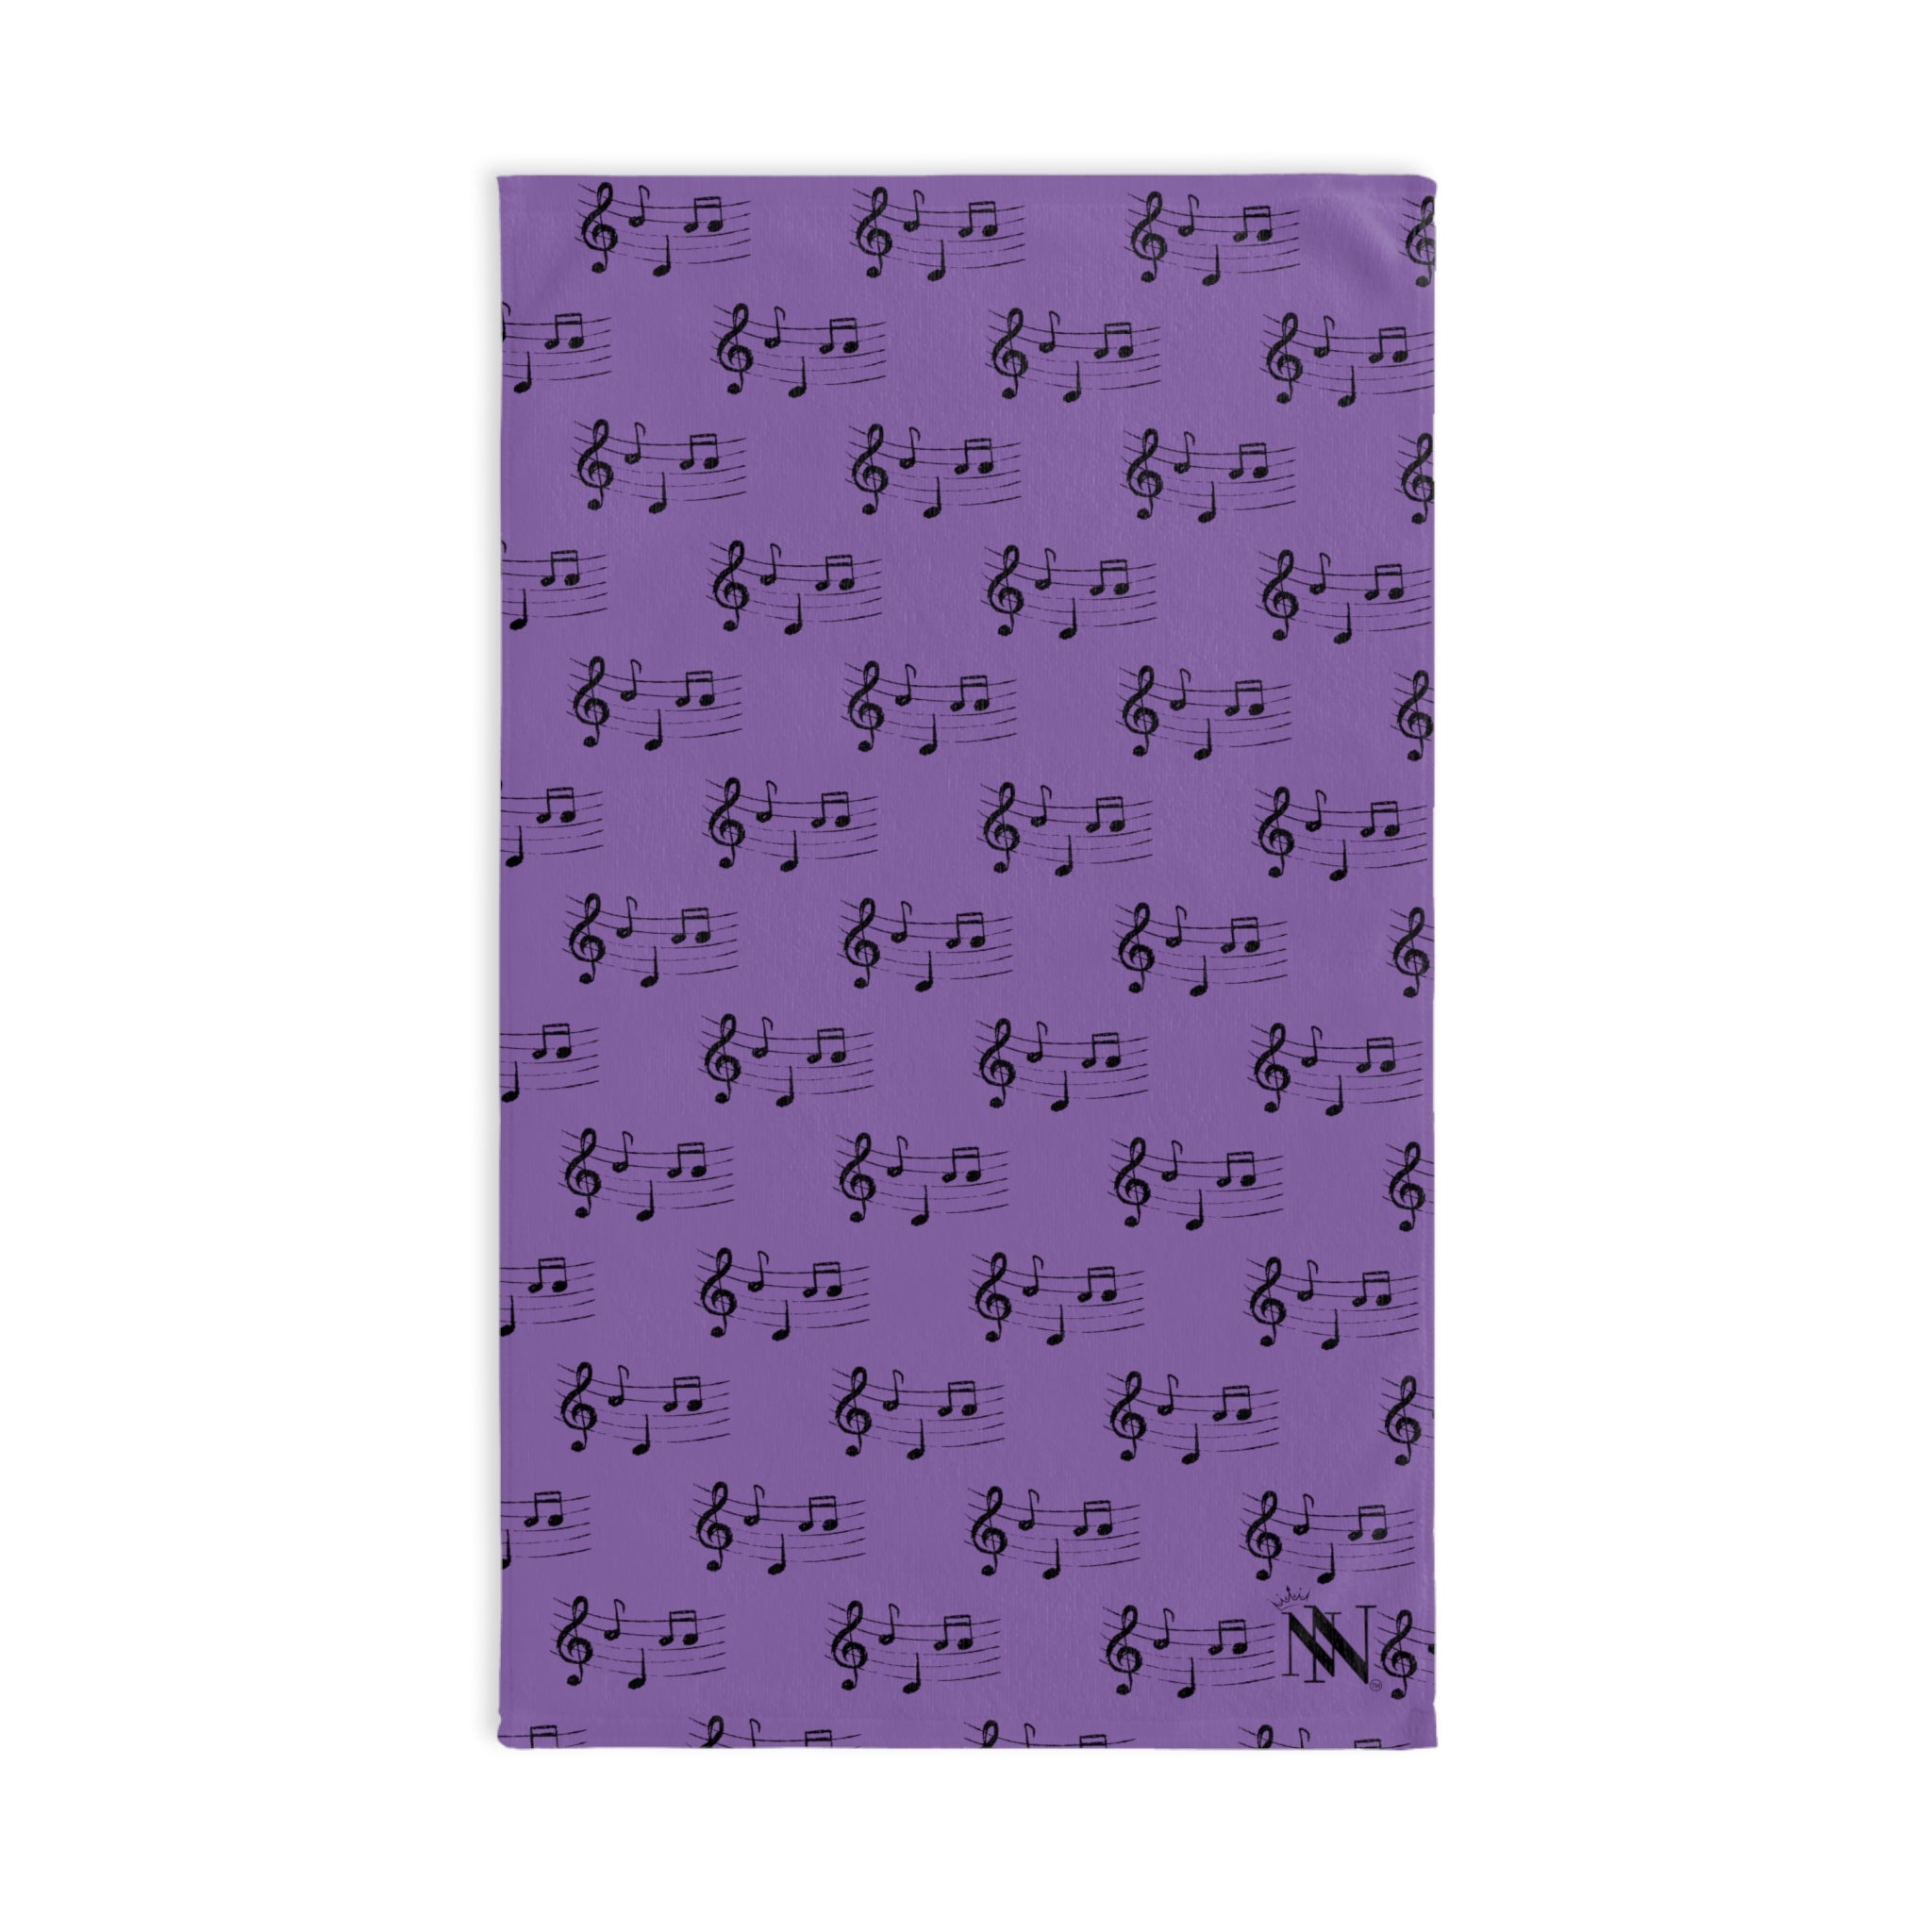 Black Love Notes Lavendar | Funny Gifts for Men - Gifts for Him - Birthday Gifts for Men, Him, Husband, Boyfriend, New Couple Gifts, Fathers & Valentines Day Gifts, Hand Towels NECTAR NAPKINS